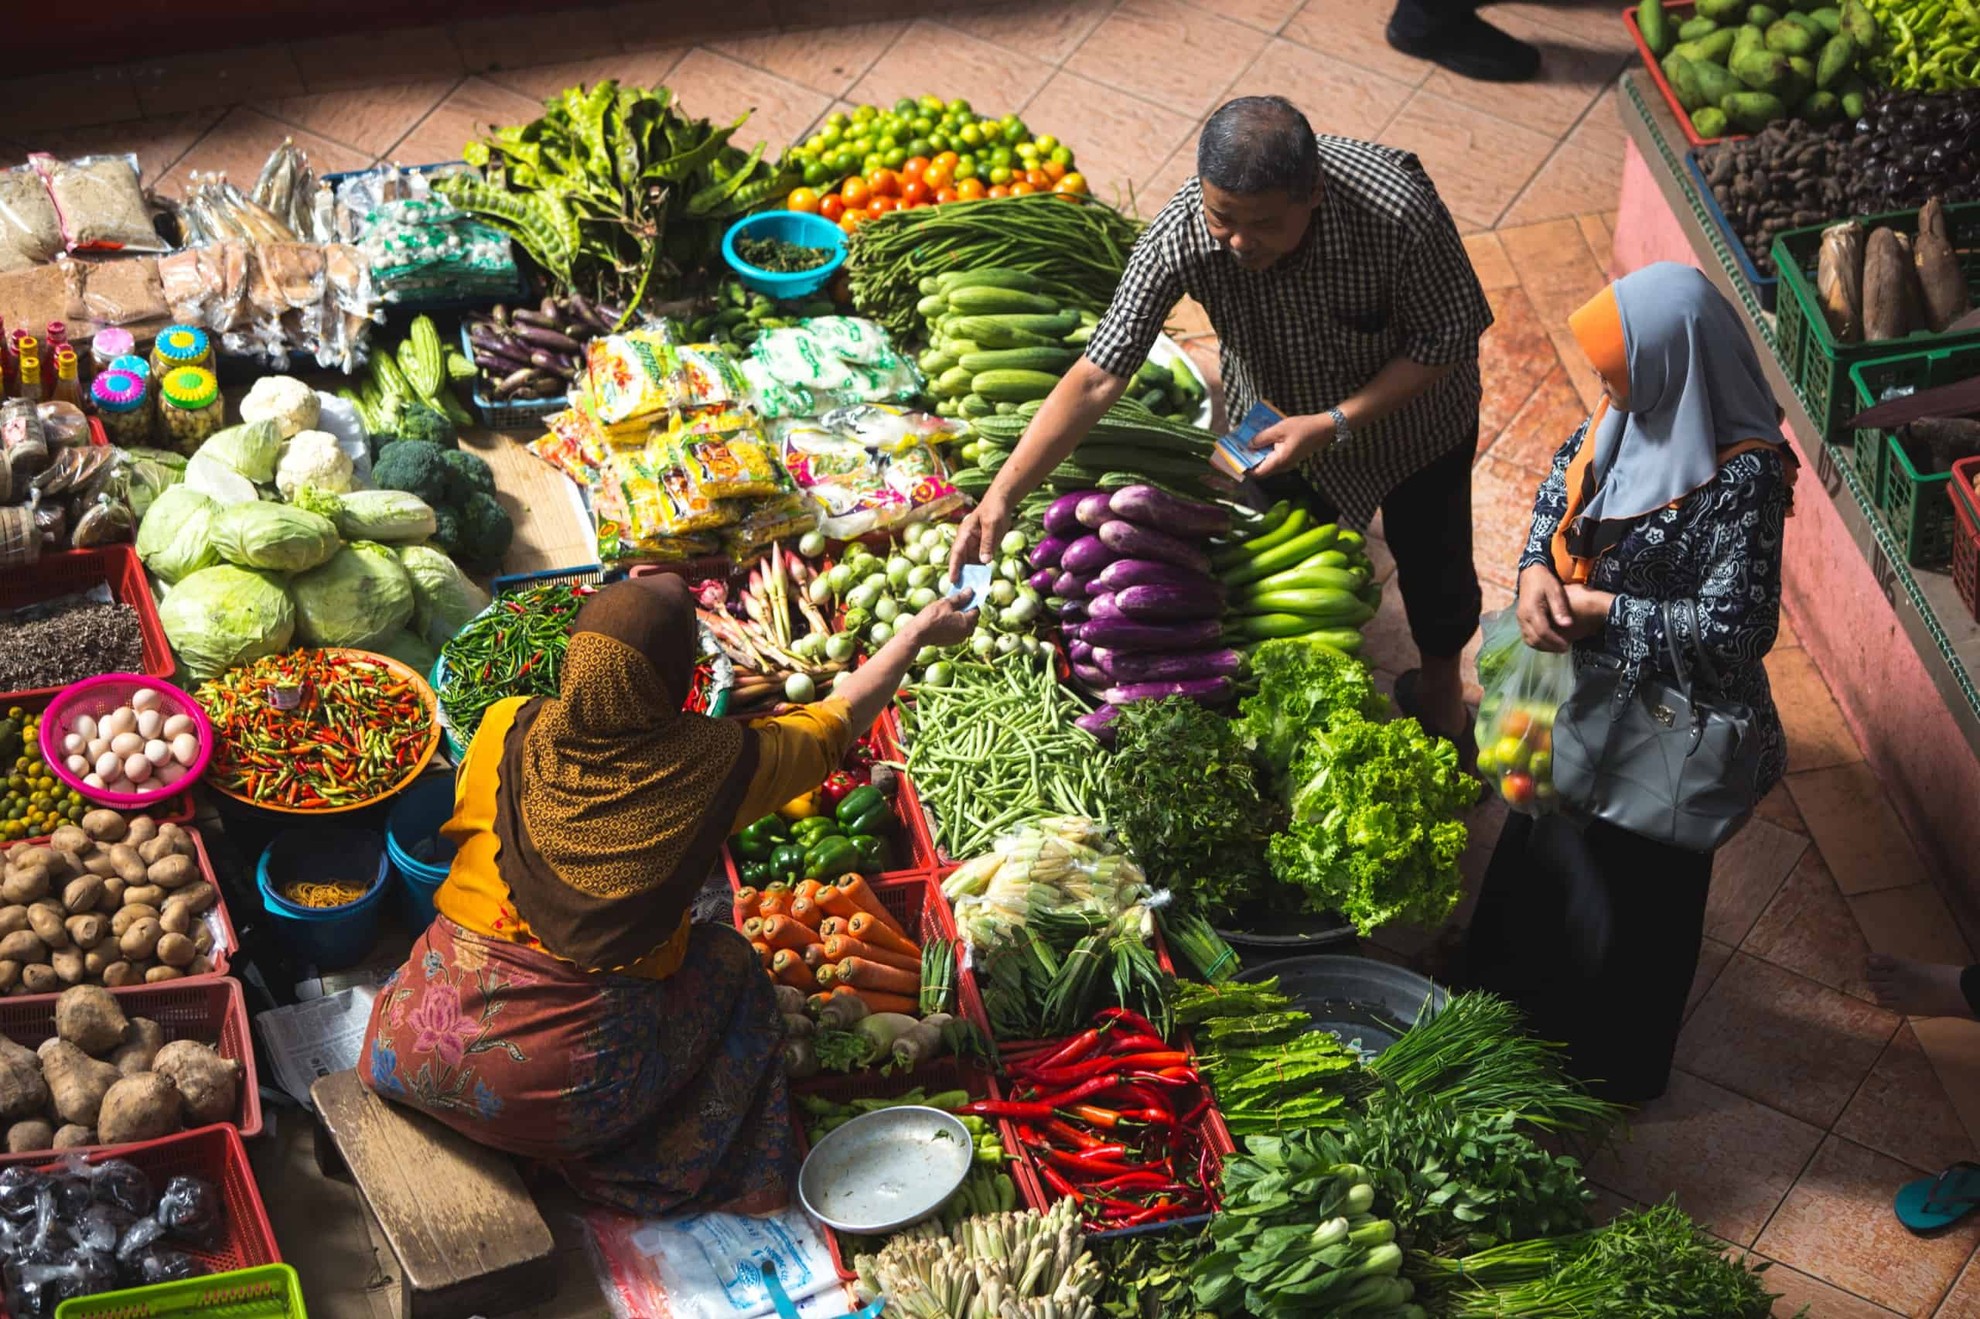 Produce vendor and shoppers at a market in Indonesia